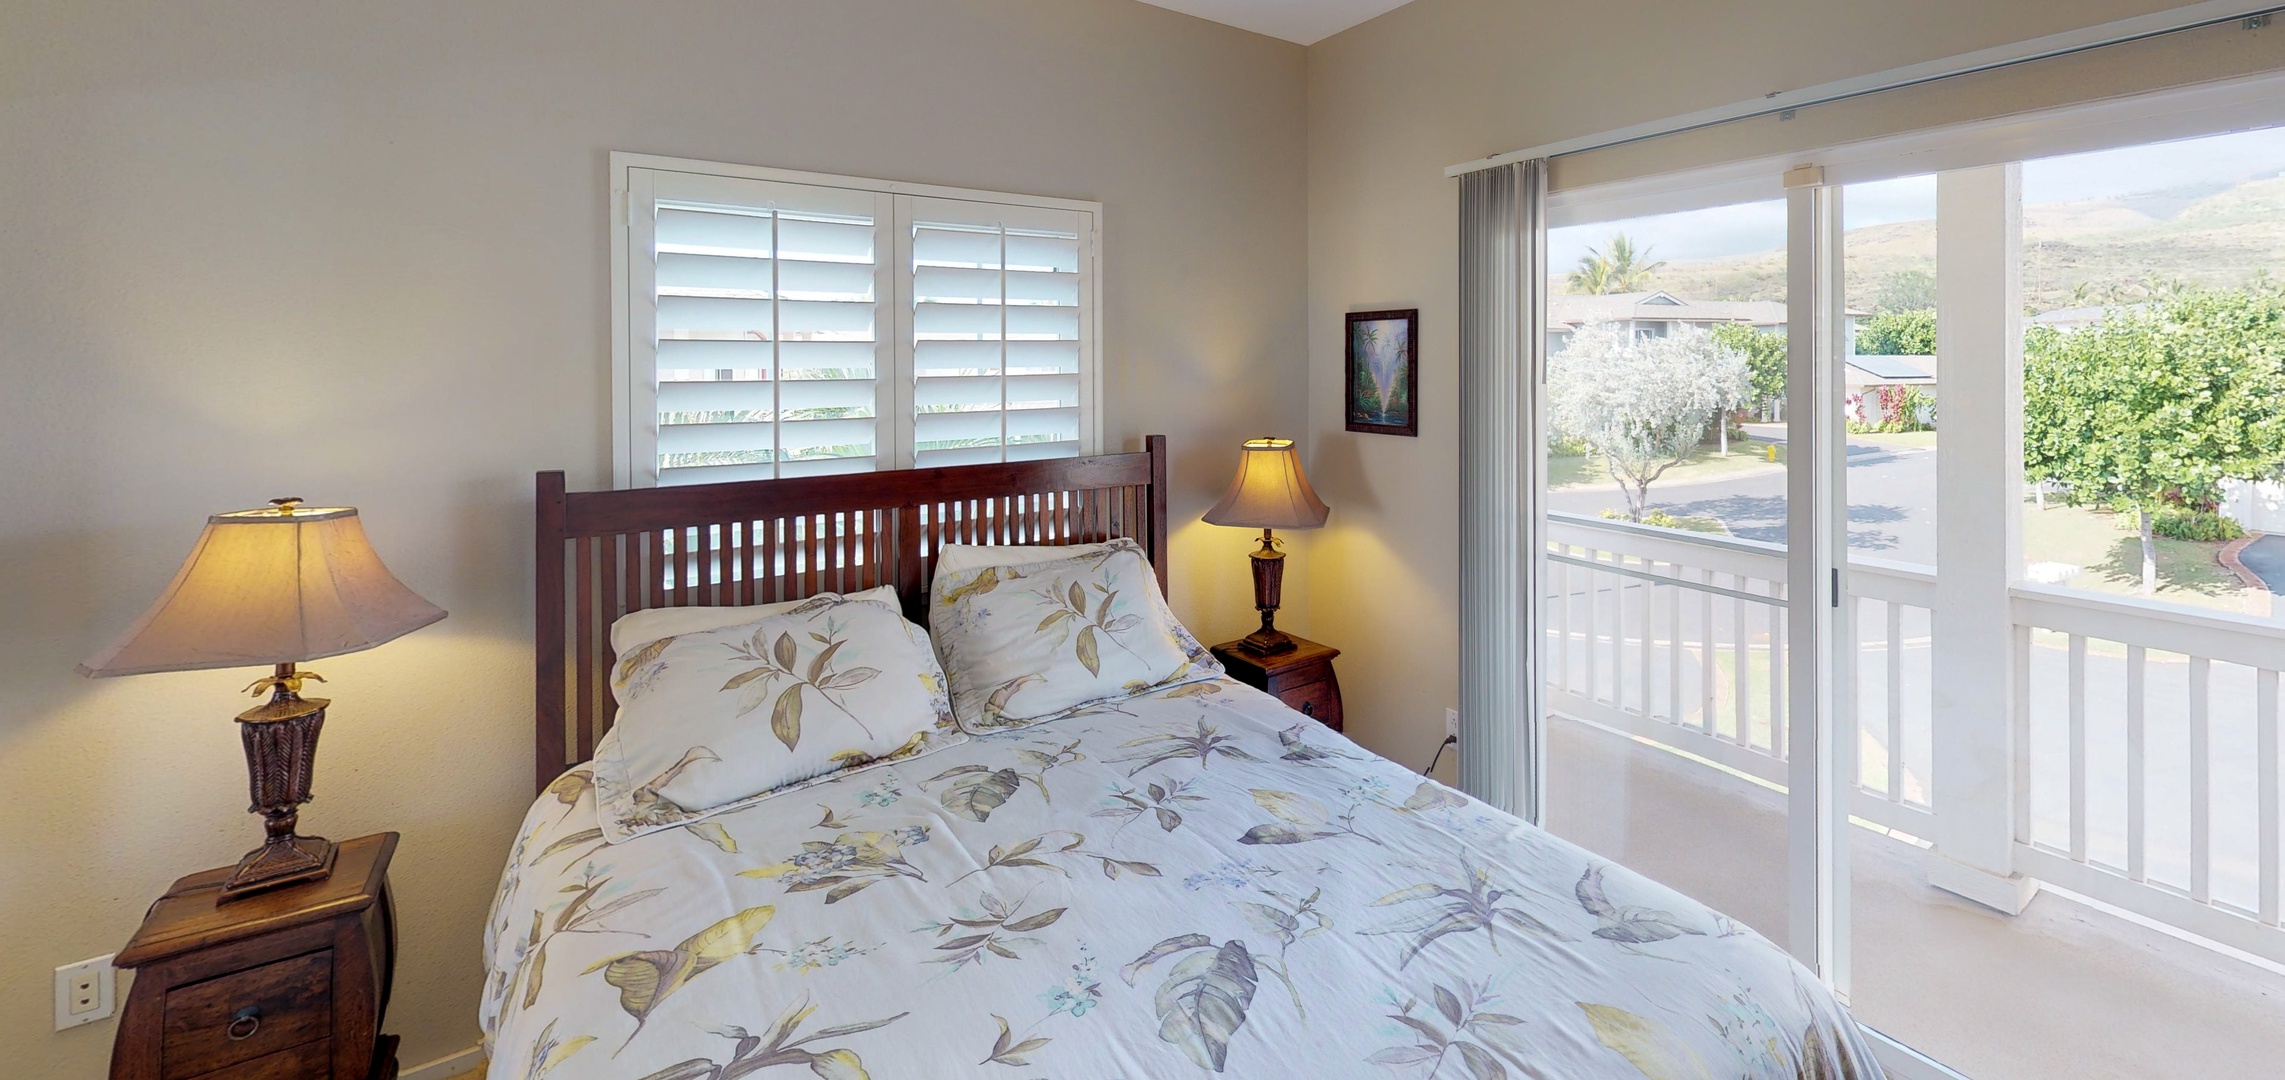 Kapolei Vacation Rentals, Coconut Plantation 1194-3 - The second guest bedroom with private lanai access.